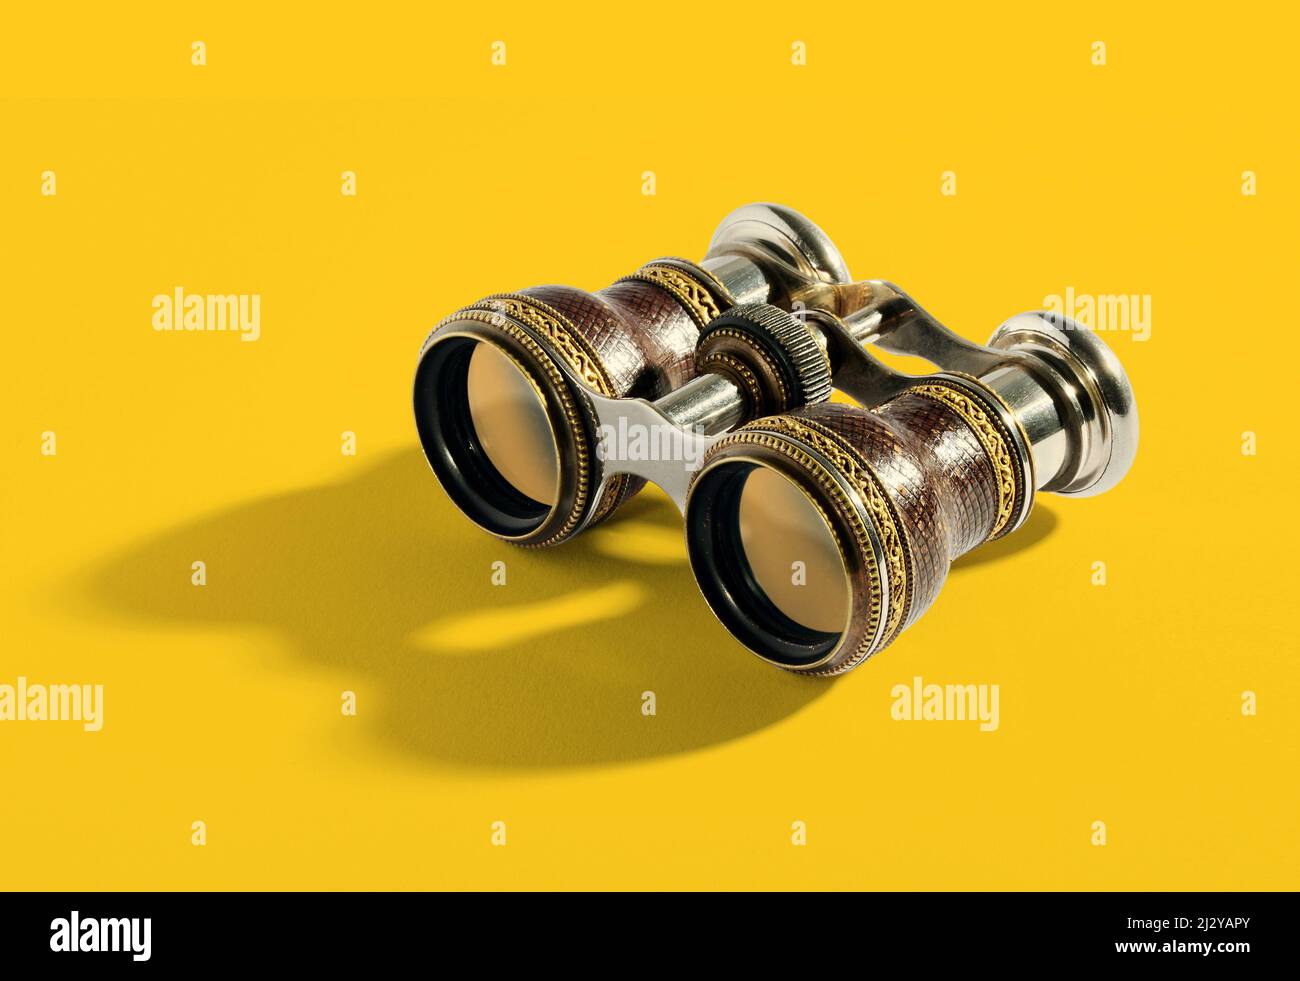 Pair of small vintage binoculars or opera glasses with a metal frame for magnifying objects at a distance on a yellow background with shadow detail Stock Photo